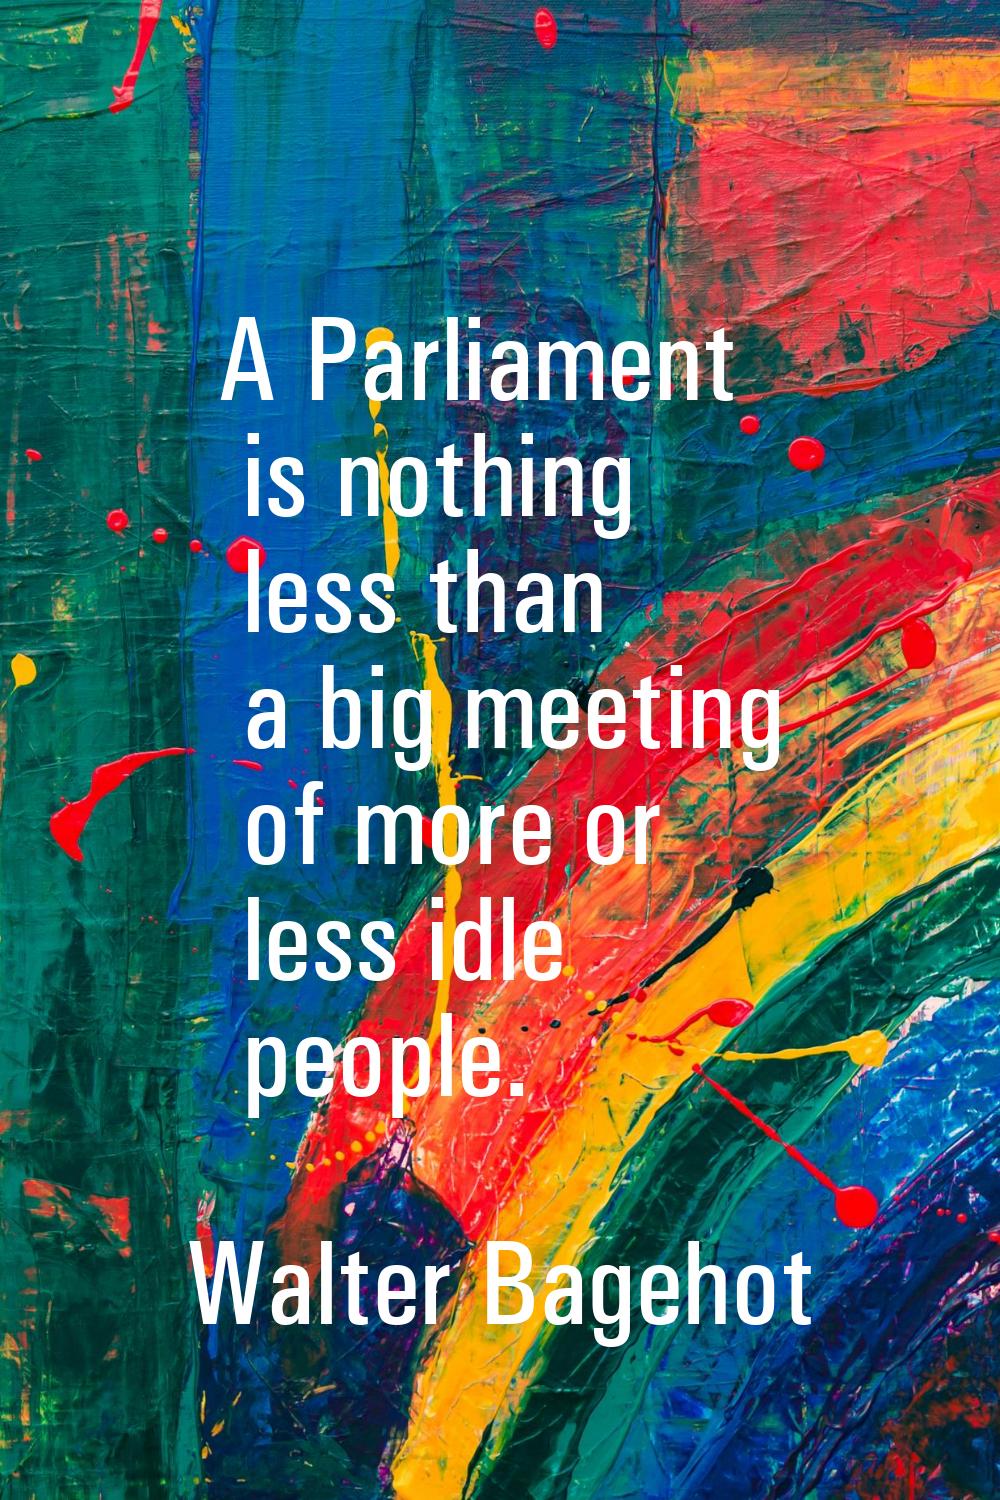 A Parliament is nothing less than a big meeting of more or less idle people.